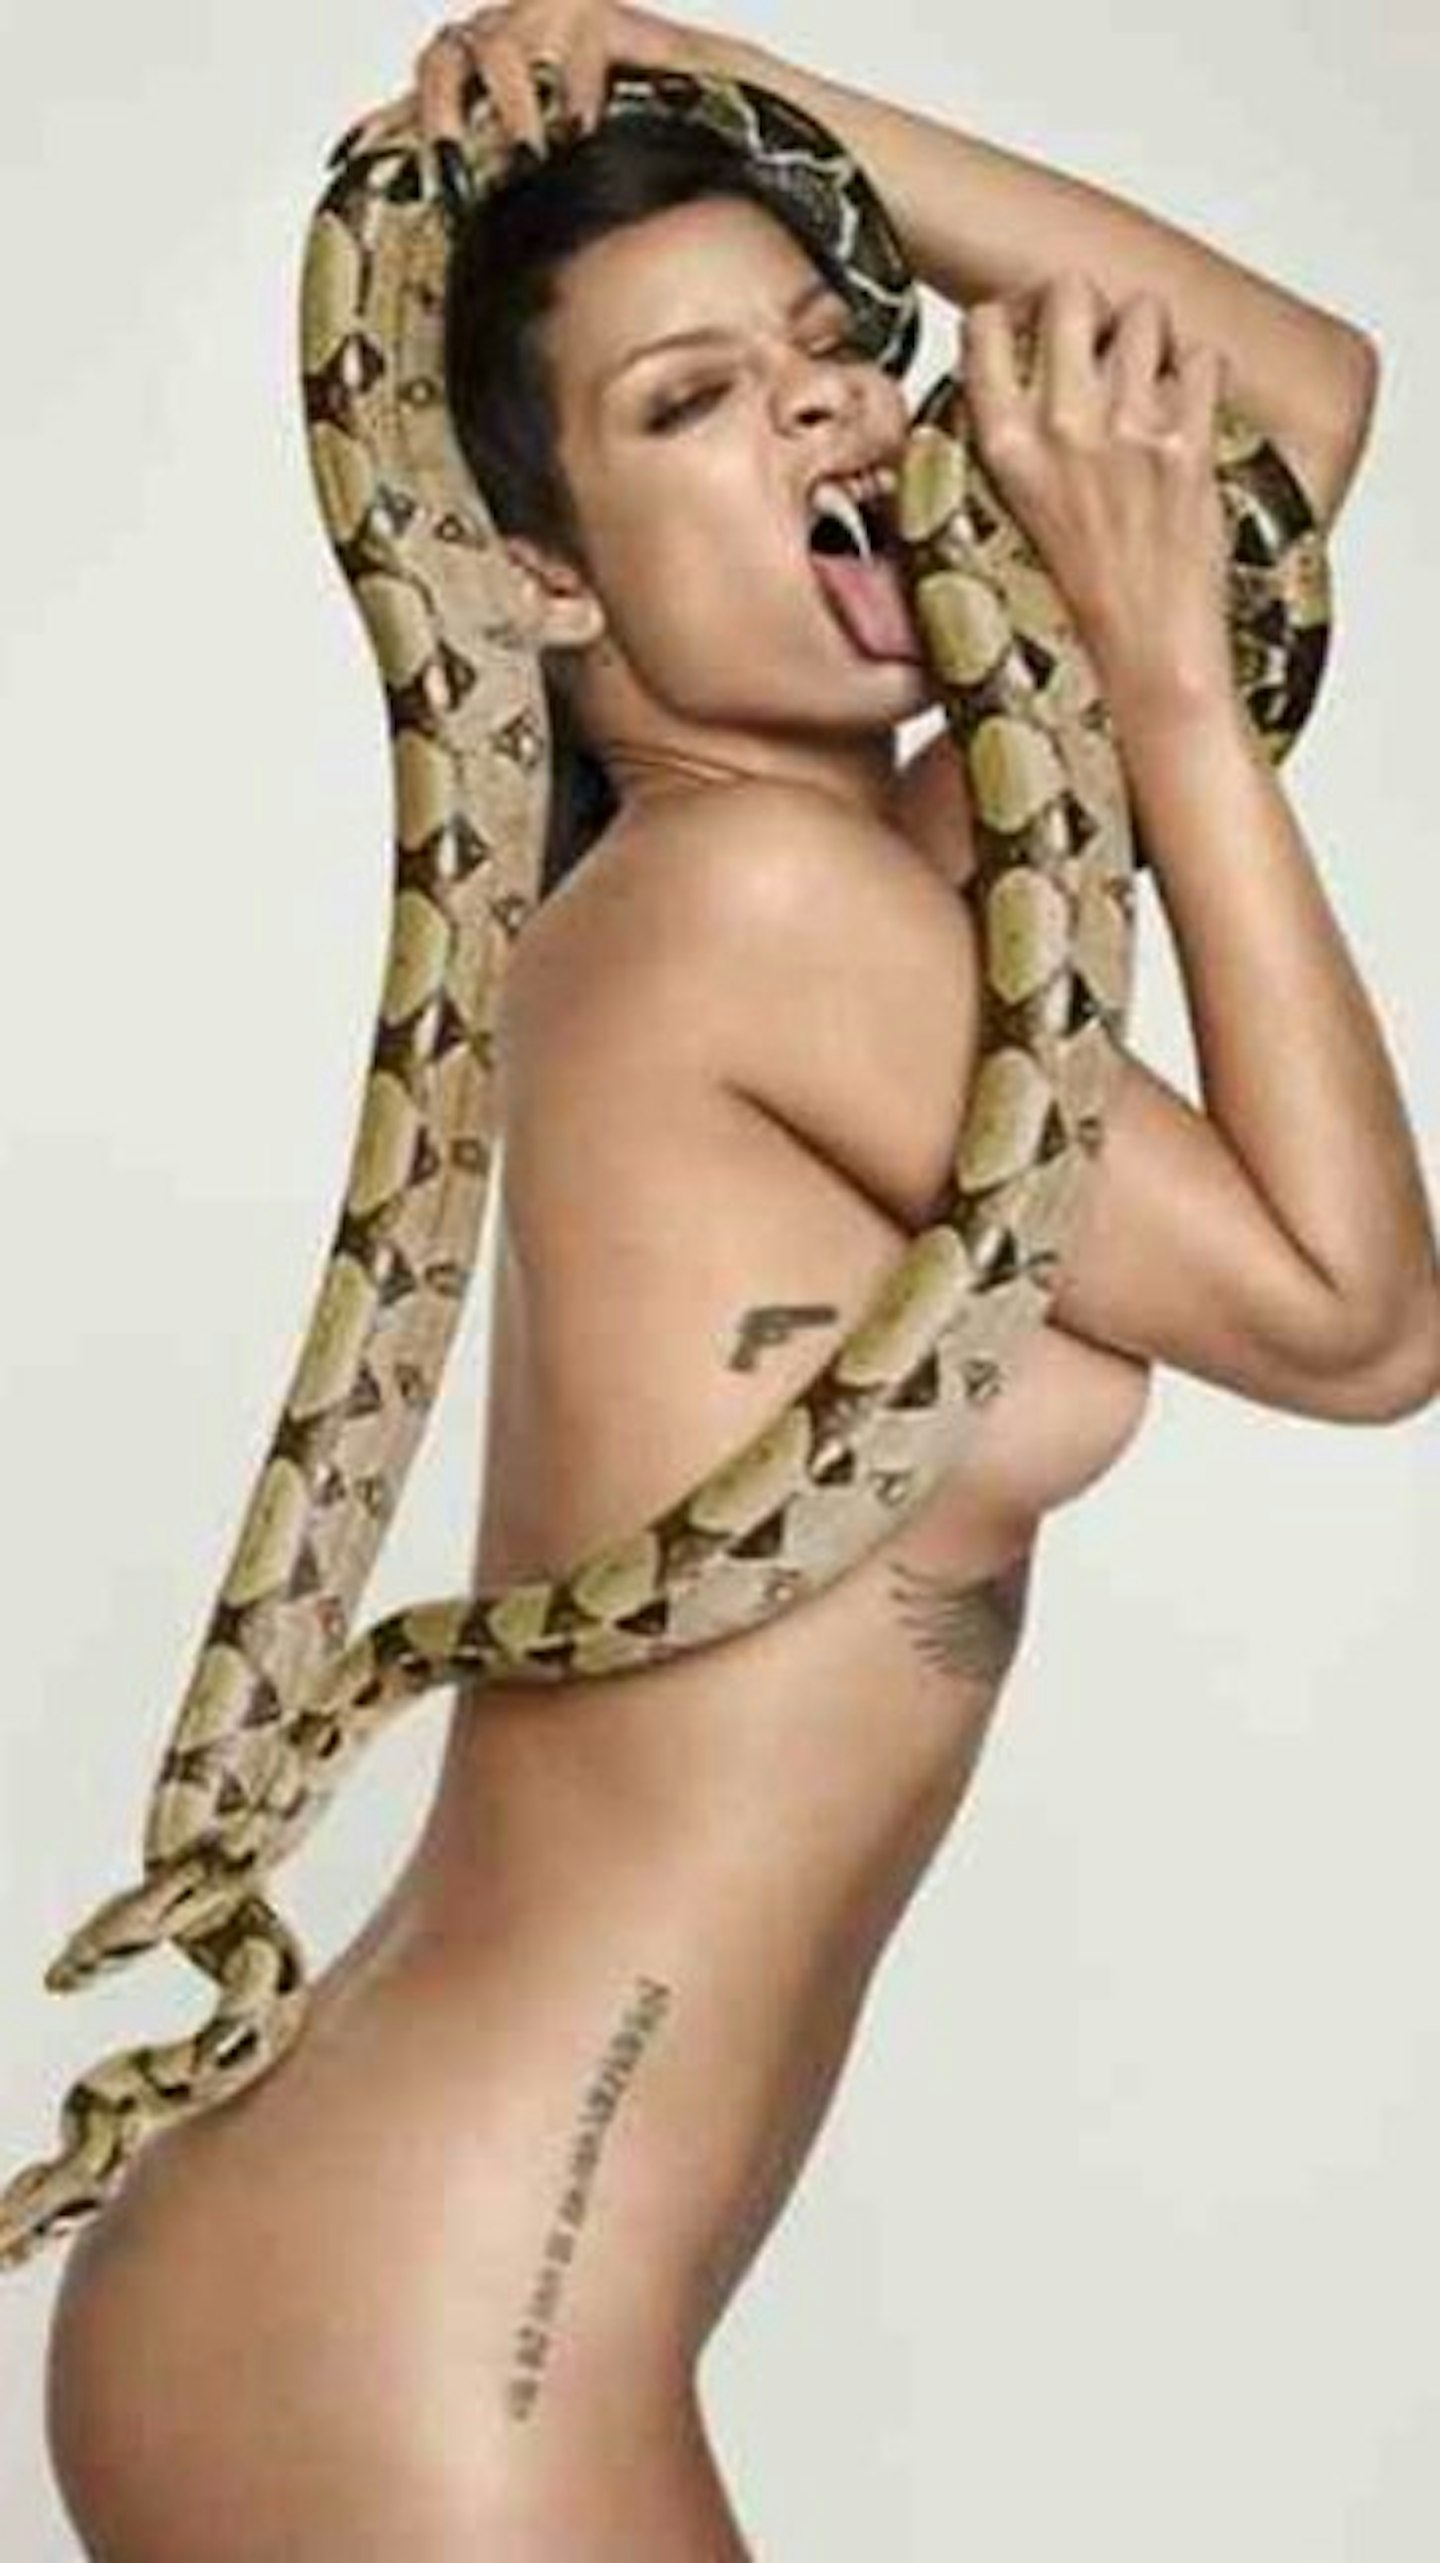 RiRi posed naked for GQ recently